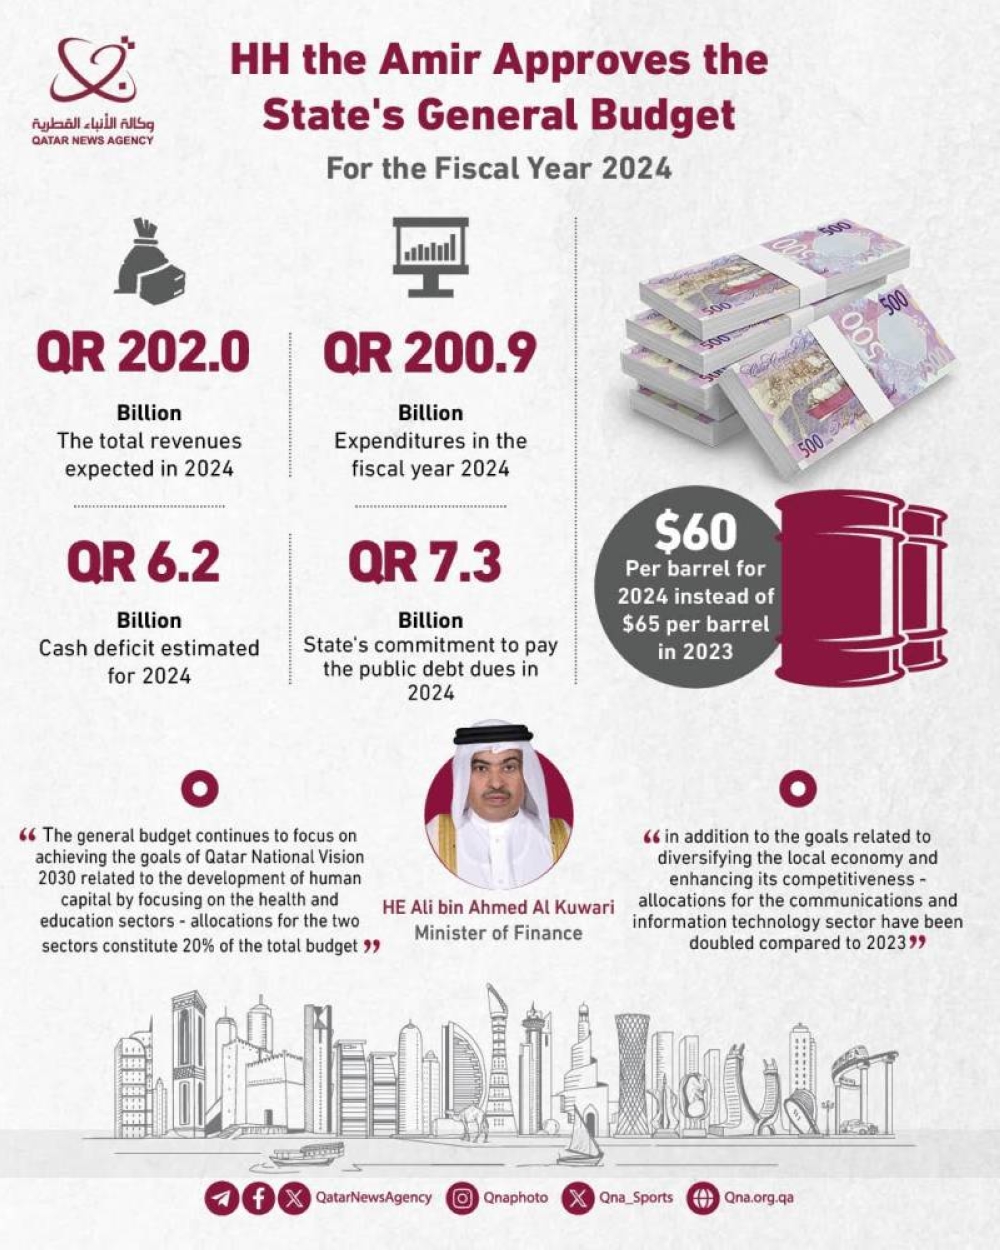 Qatar expects total revenue of QR202 billion in 2024 budget Read